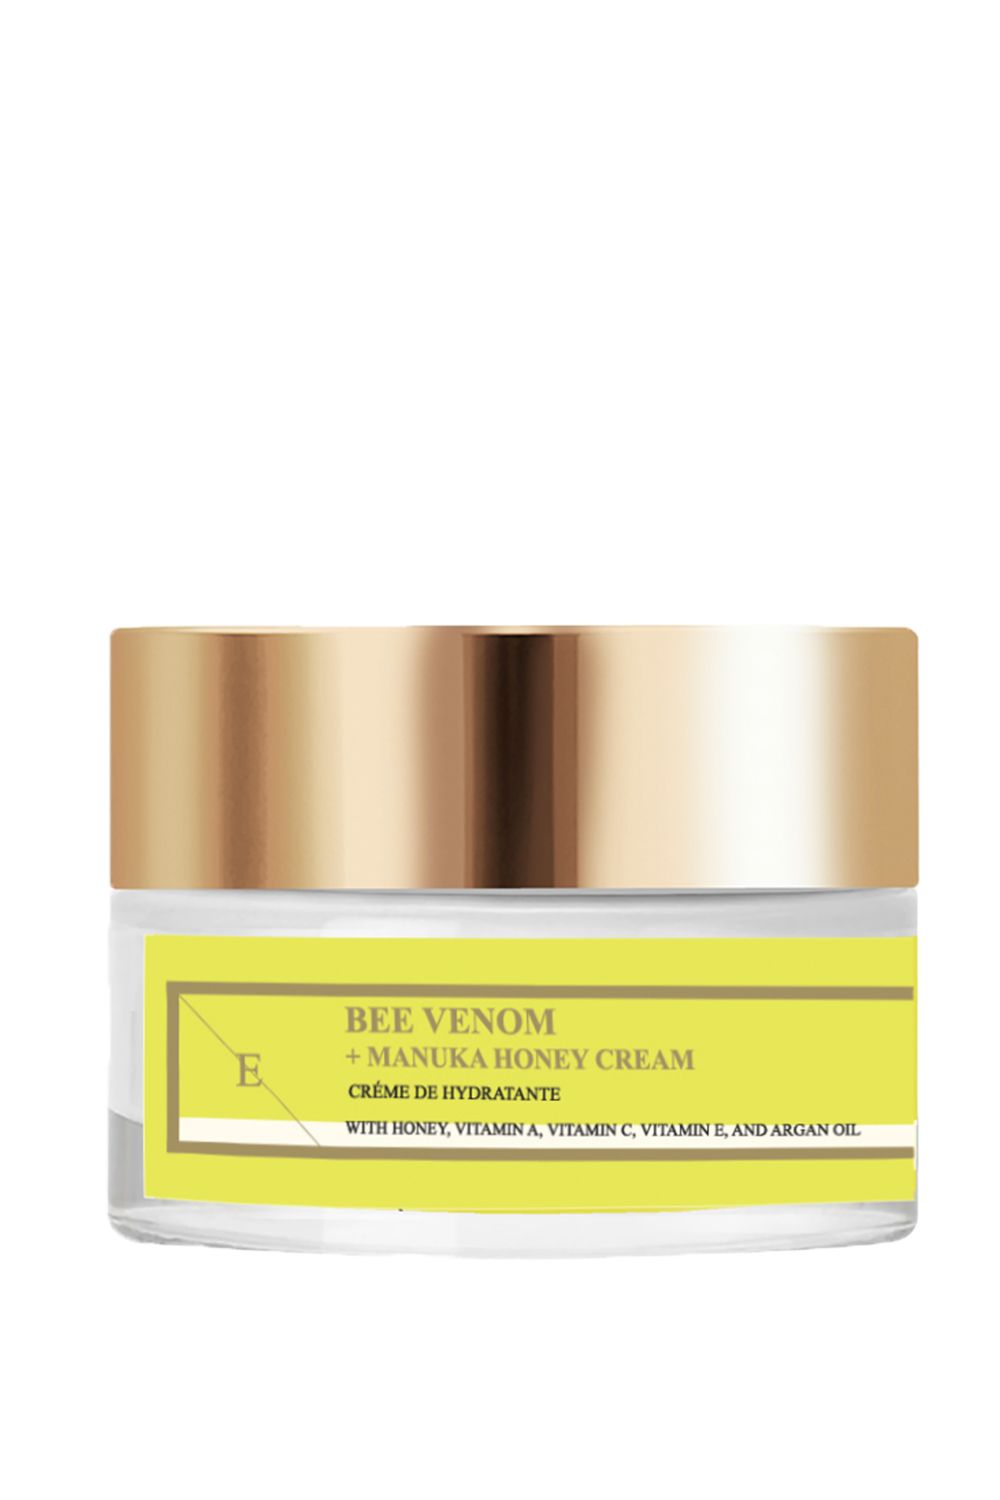 -Luxuriously smooth cream that melts into your skin.

-This super cocktail of active ingredients will improve your skin texture. Hydrate and restore balance to your skin leaving it soft and plump!



Benefits 

-Vitamin A + Bee venom. Powerful actives that reduce the signs of aging for a more youthful appearance.

-Vitamin C helps to even the skin tone, fade away dark spots 

-Vitamin E + Argan oil both increase moisture levels in the skin and improve skin integrity.